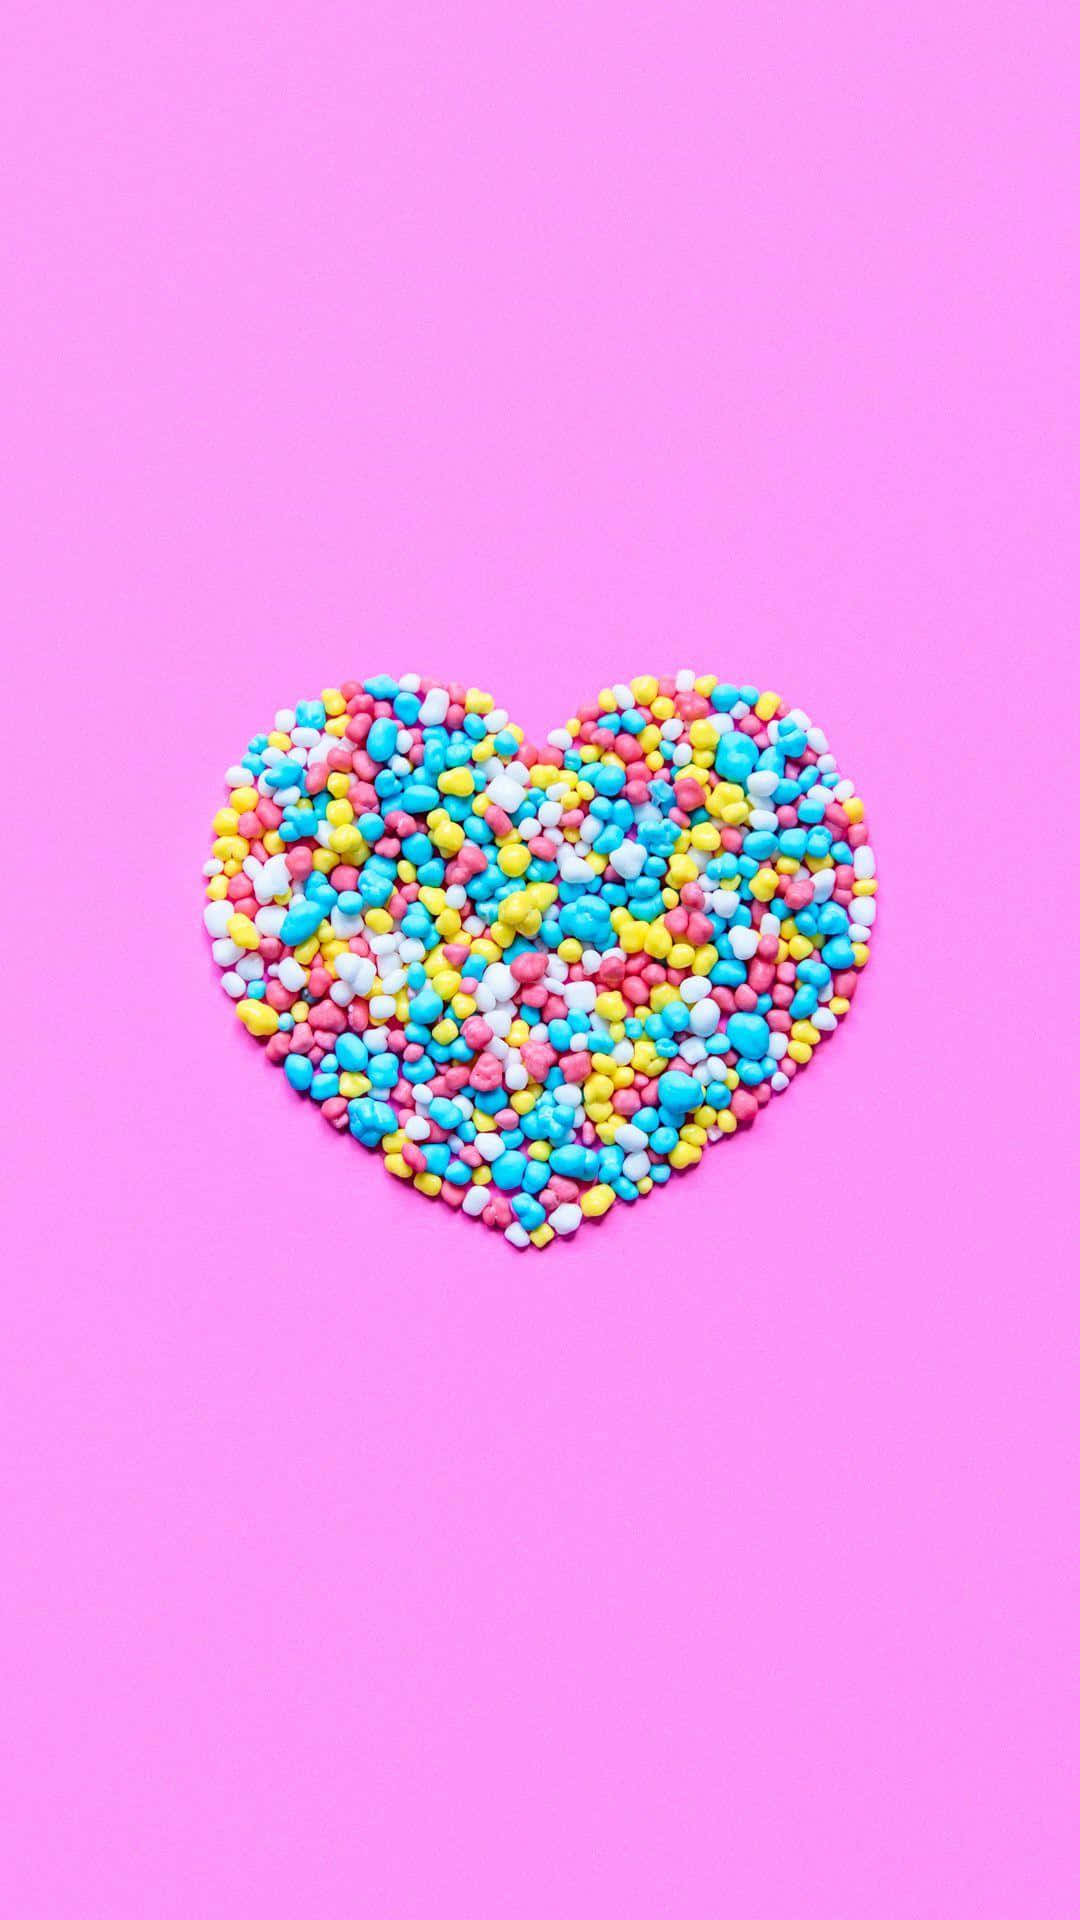 Colorful Sprinkles Hearton Pink Background Wallpaper